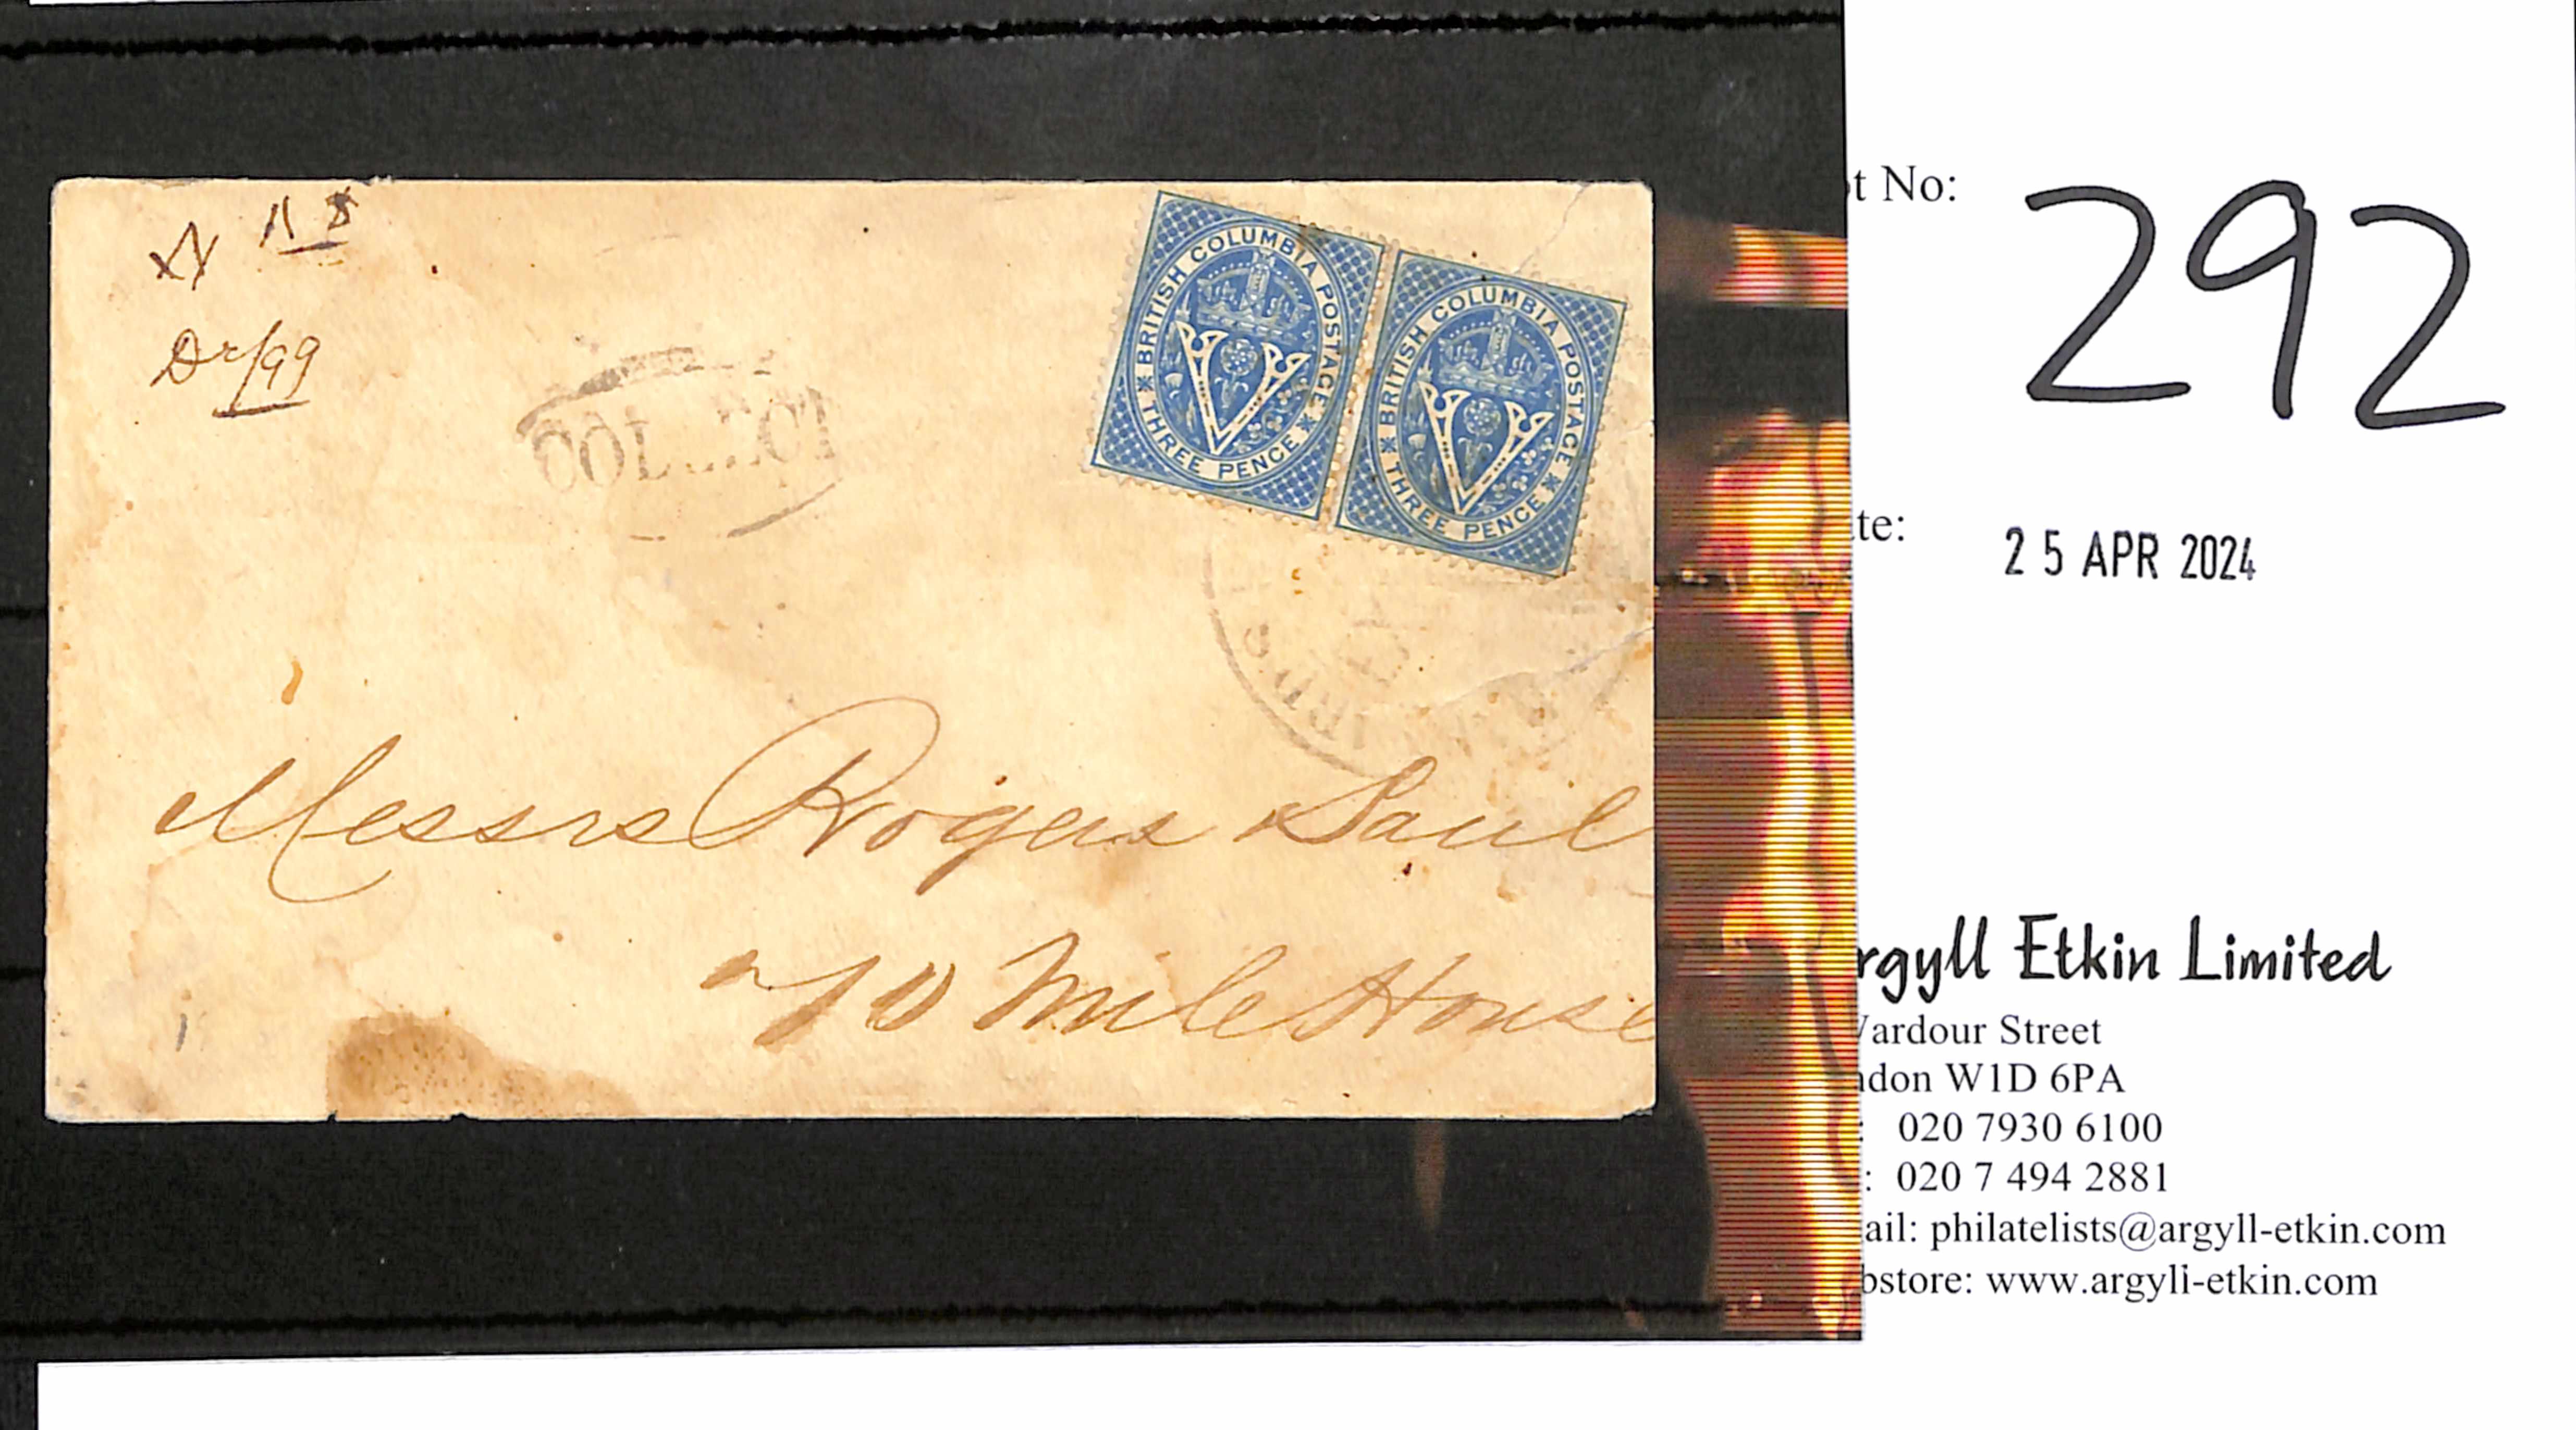 1870 (Sep 24) Cover from Yale (senders cachet on reverse) to 70 Mile House bearing 1867 3d pale blue